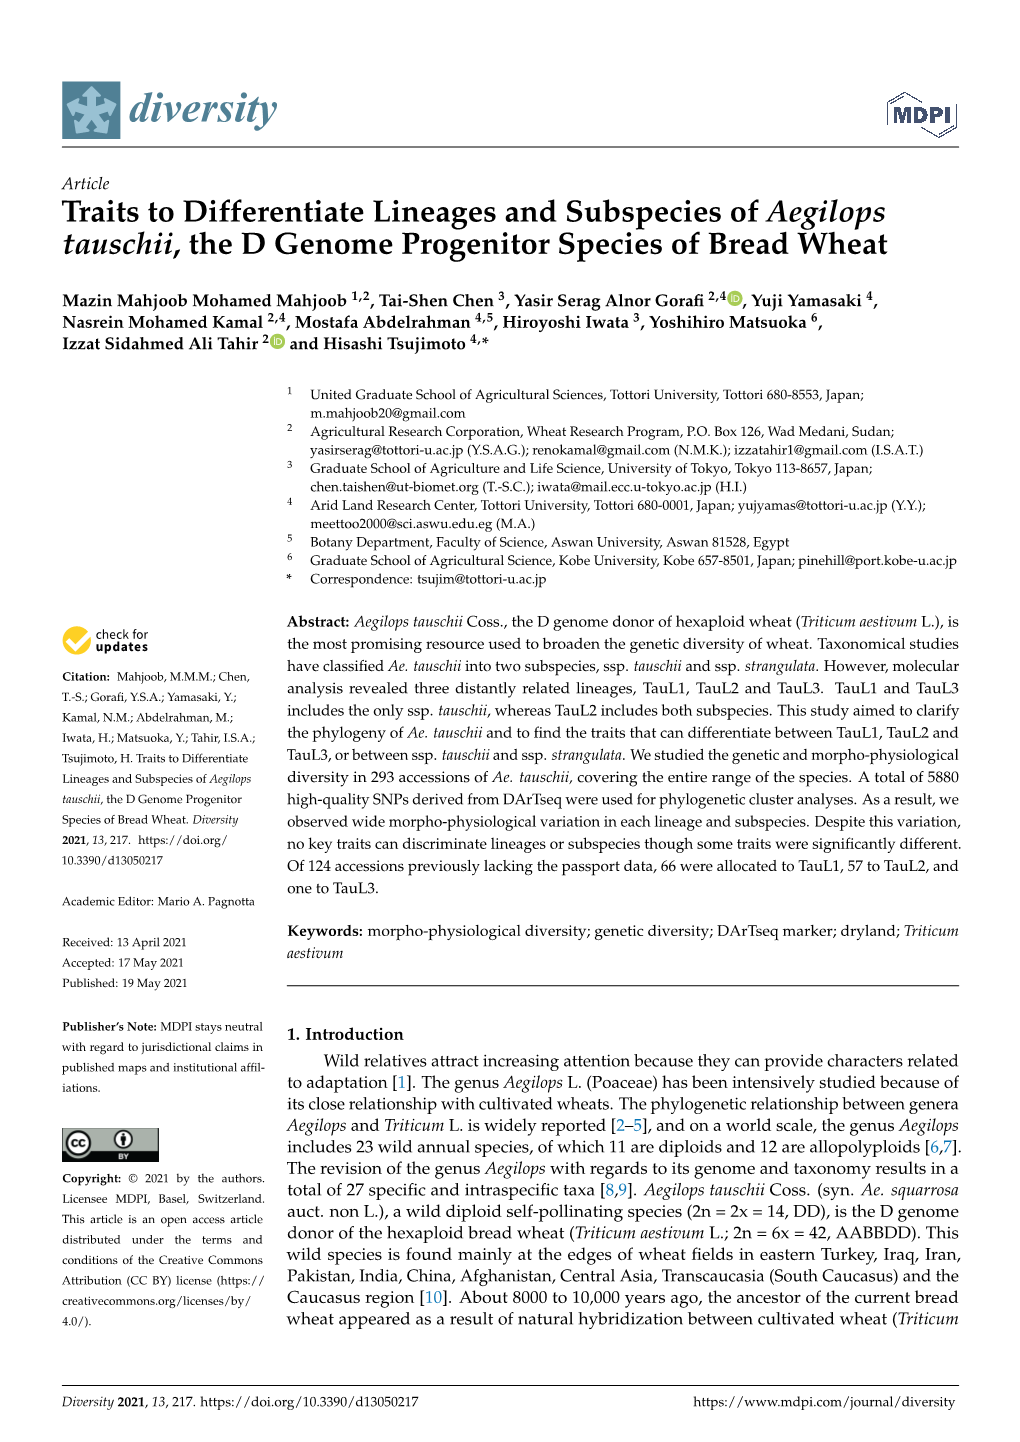 Traits to Differentiate Lineages and Subspecies of Aegilops Tauschii, the D Genome Progenitor Species of Bread Wheat